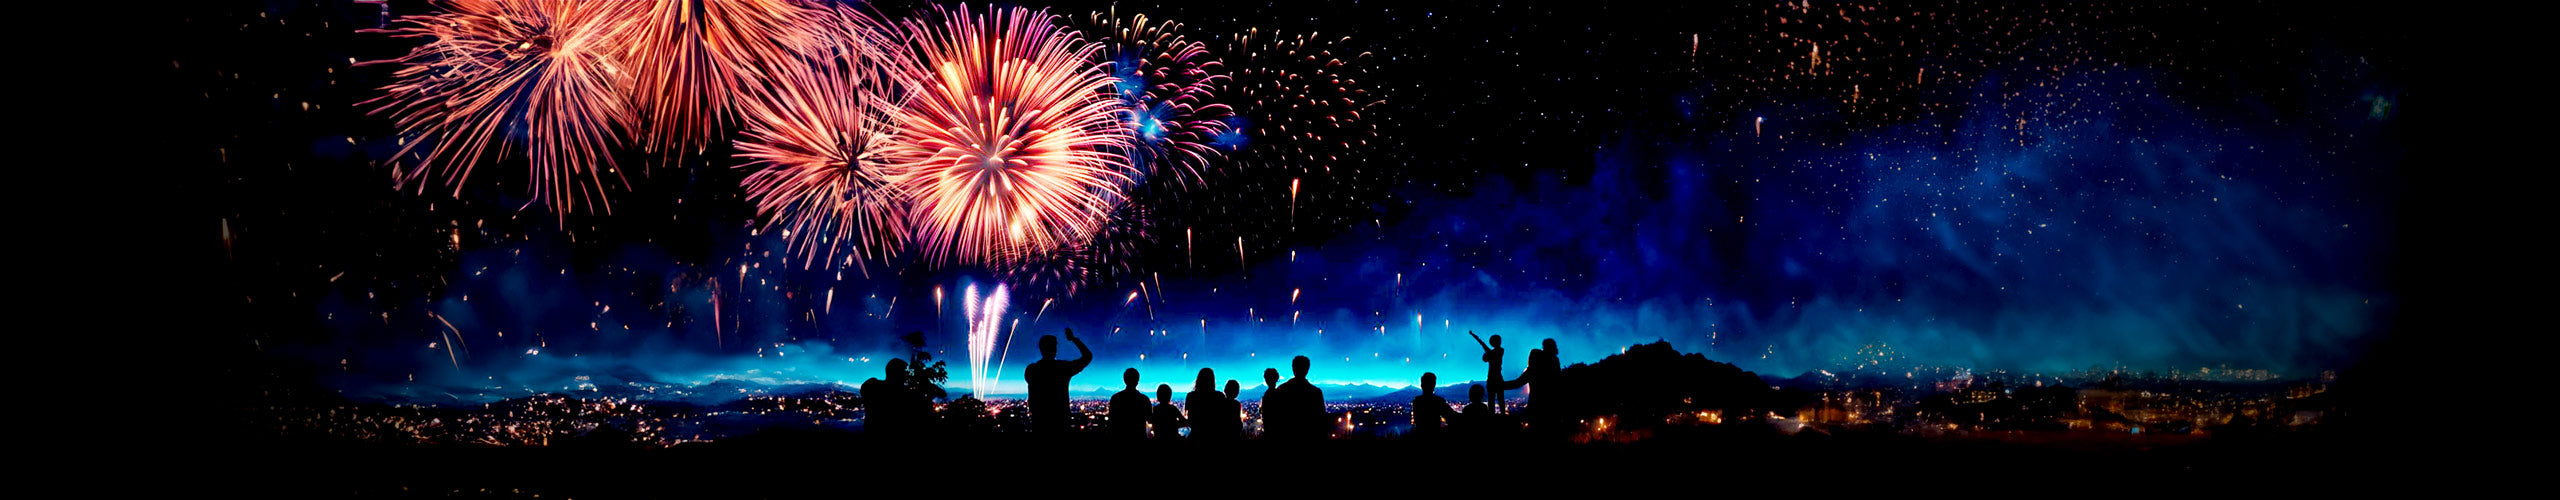 Top 10 Must-Have Fireworks for an Unforgettable New Year's Eve Display